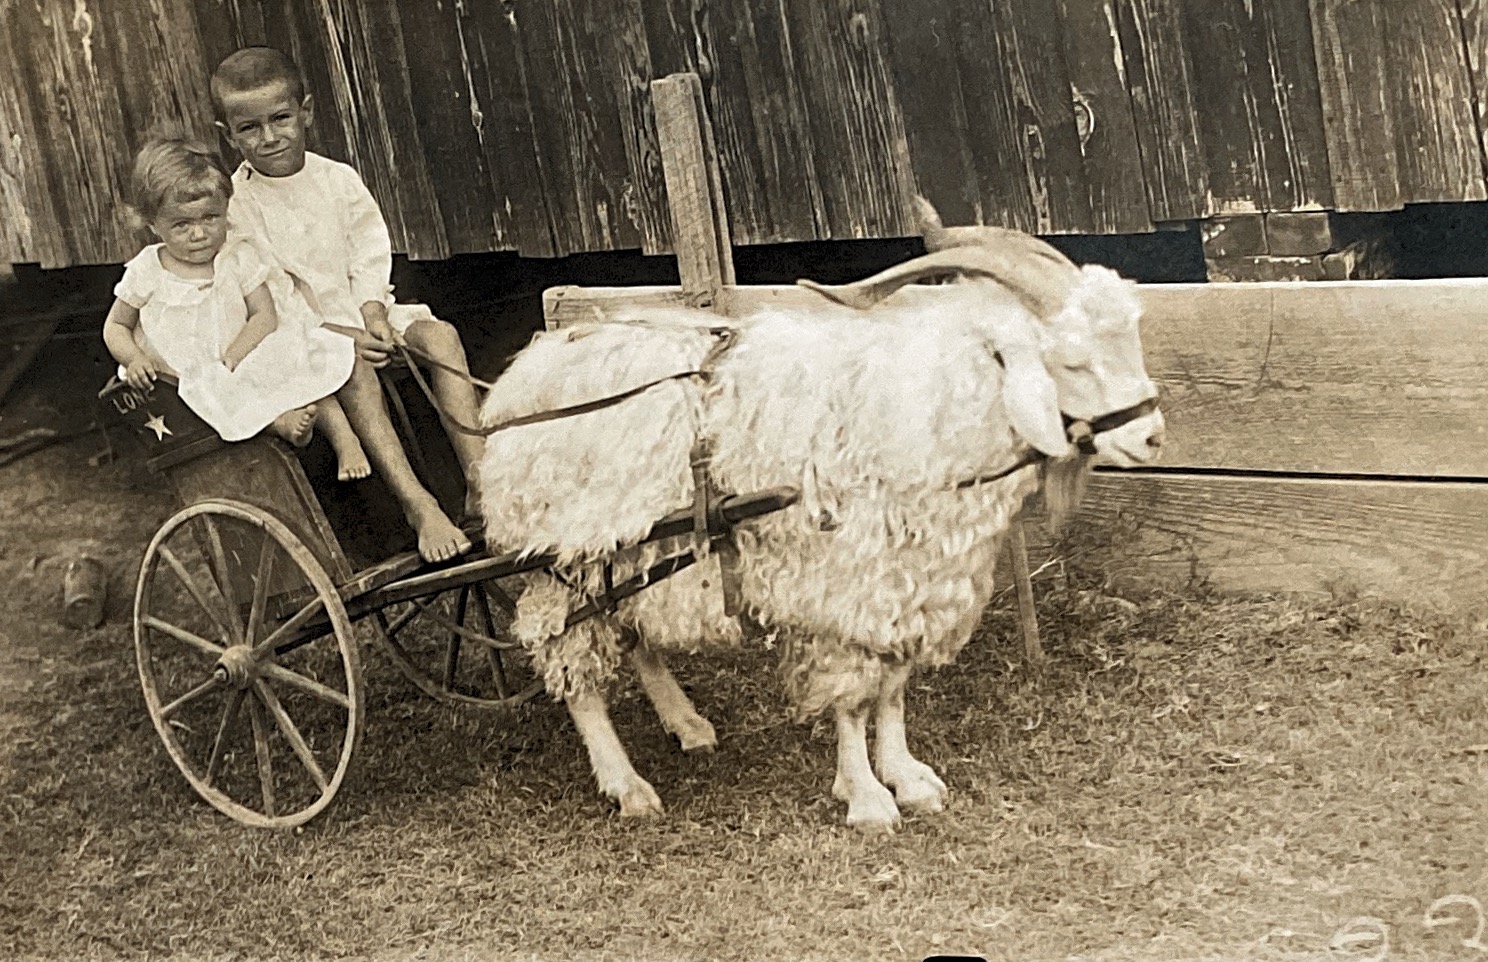 Linda Sherrill and brother Carl in their goat cart. 1915